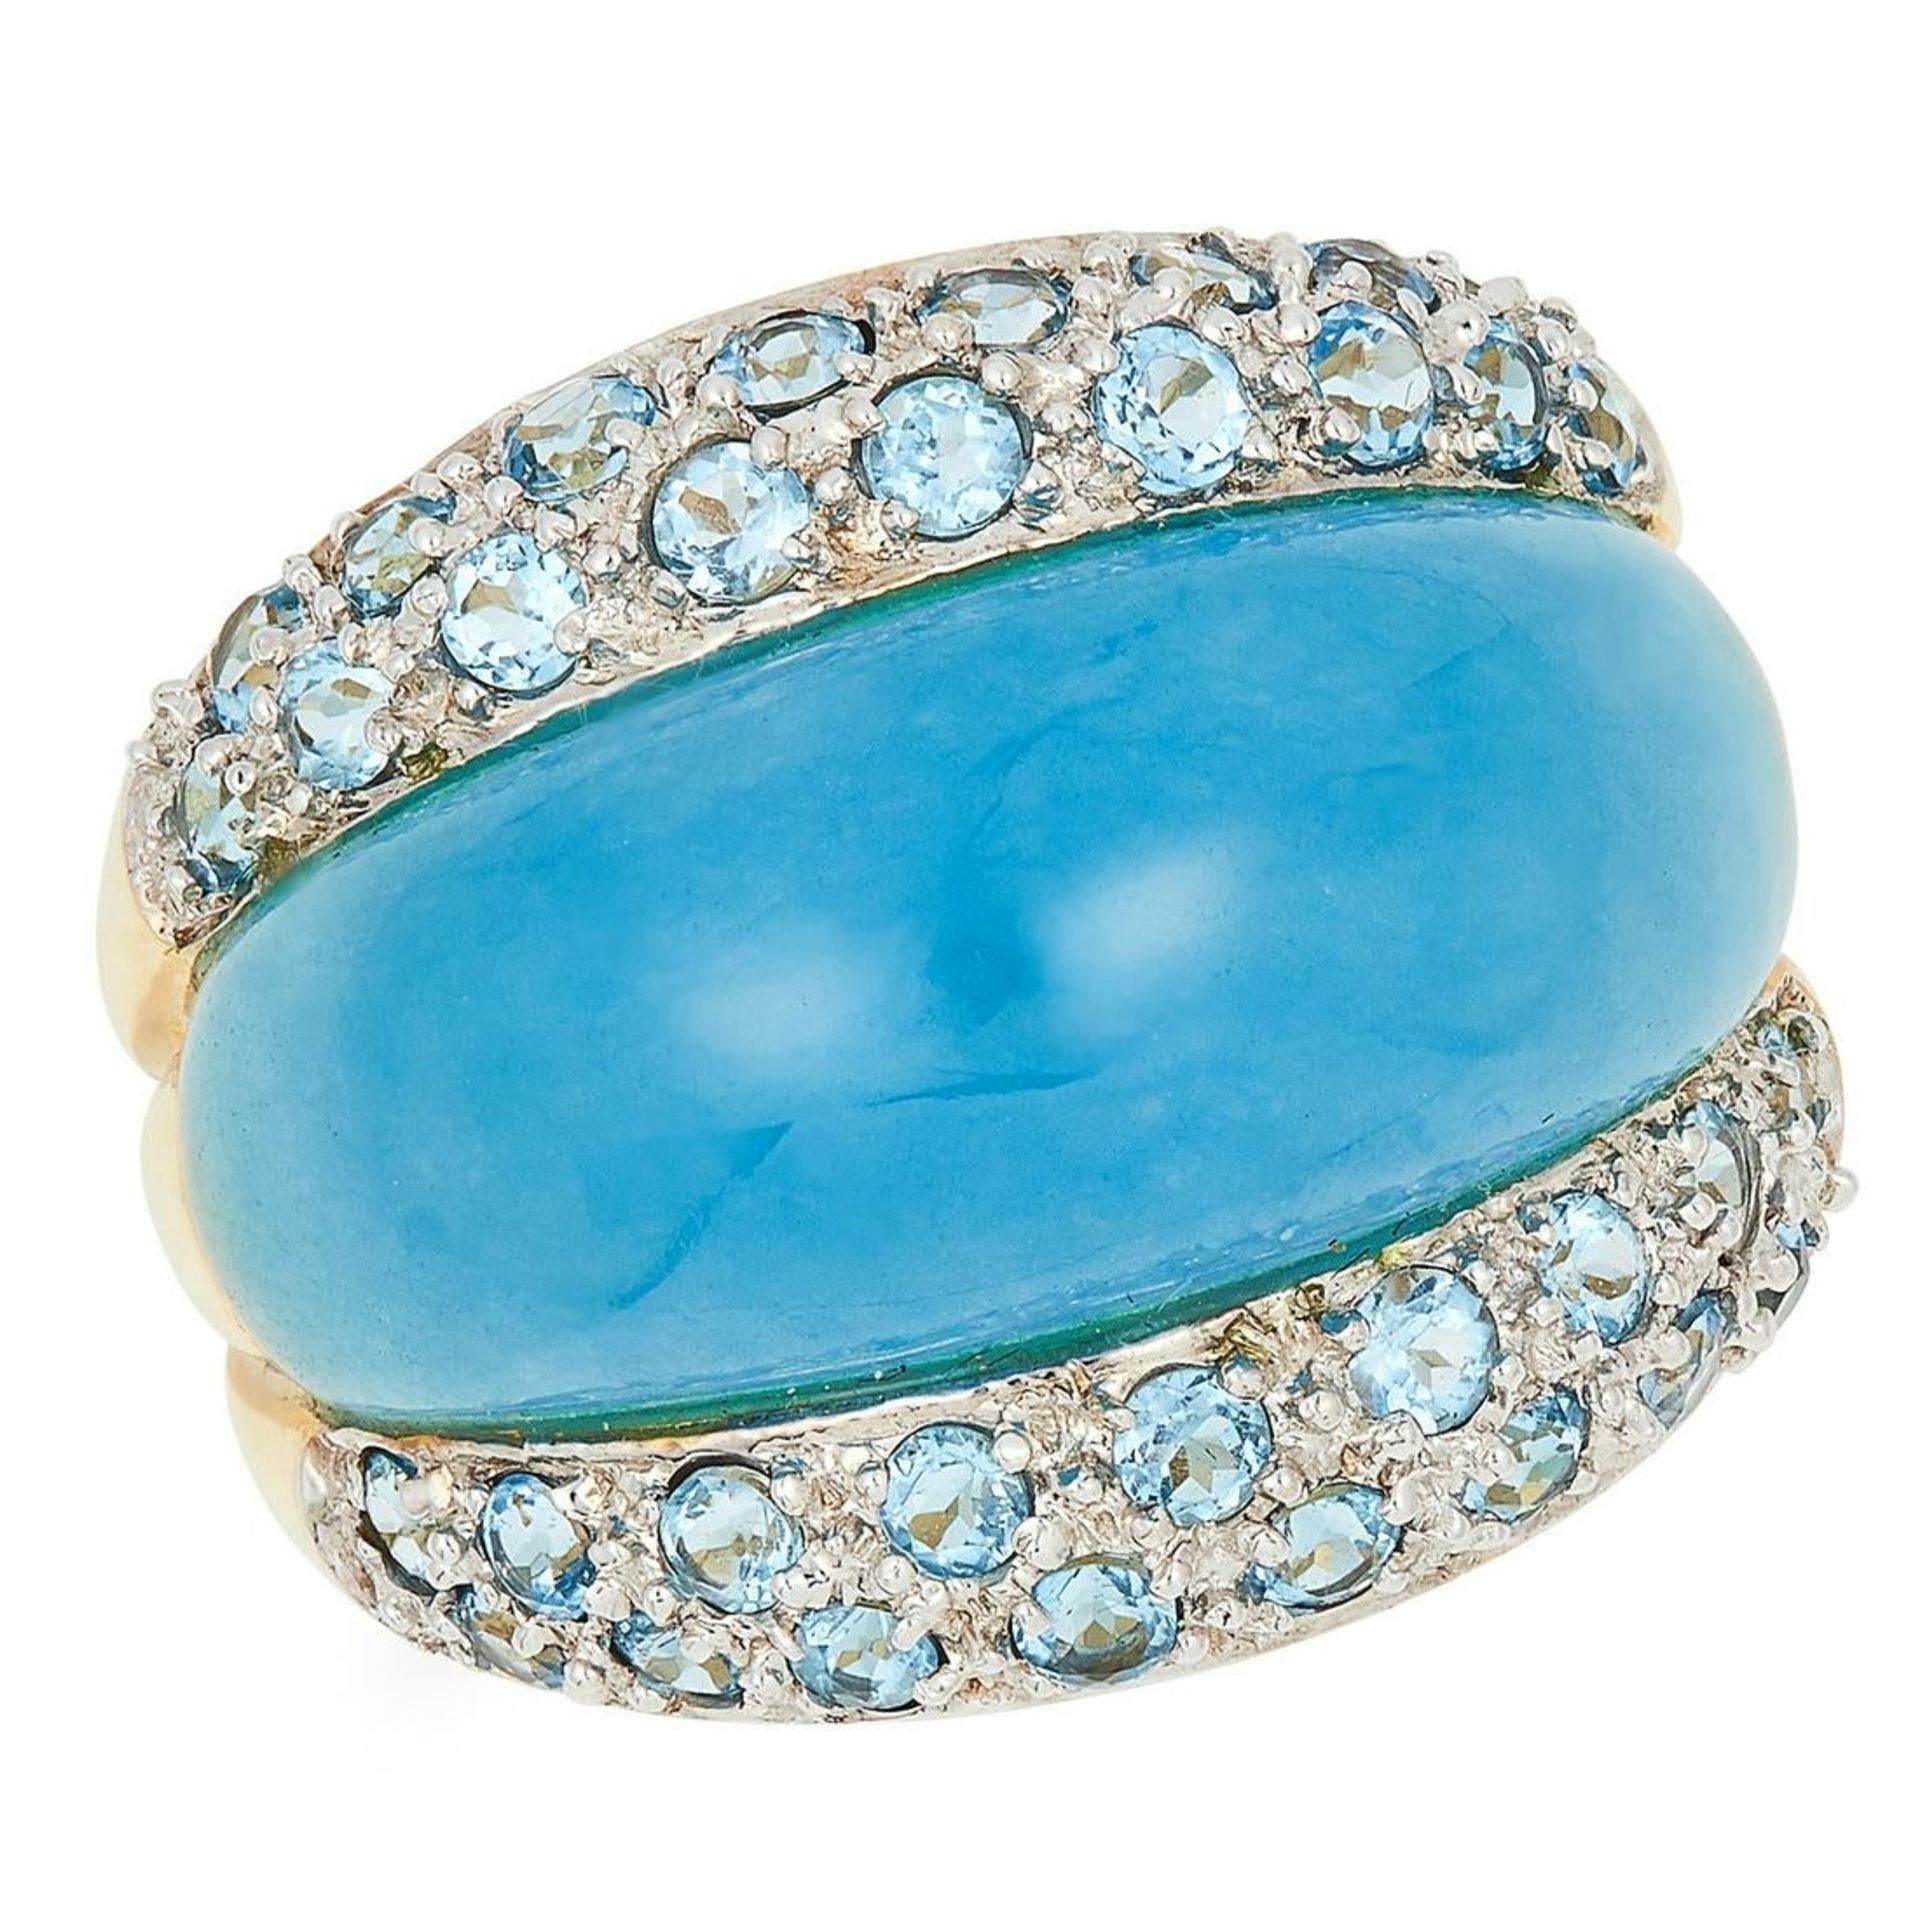 A BLUE HARDSTONE BOMBE RING, set with a blue hard stone and round cut blue stones, size M / 6, 7.1g.